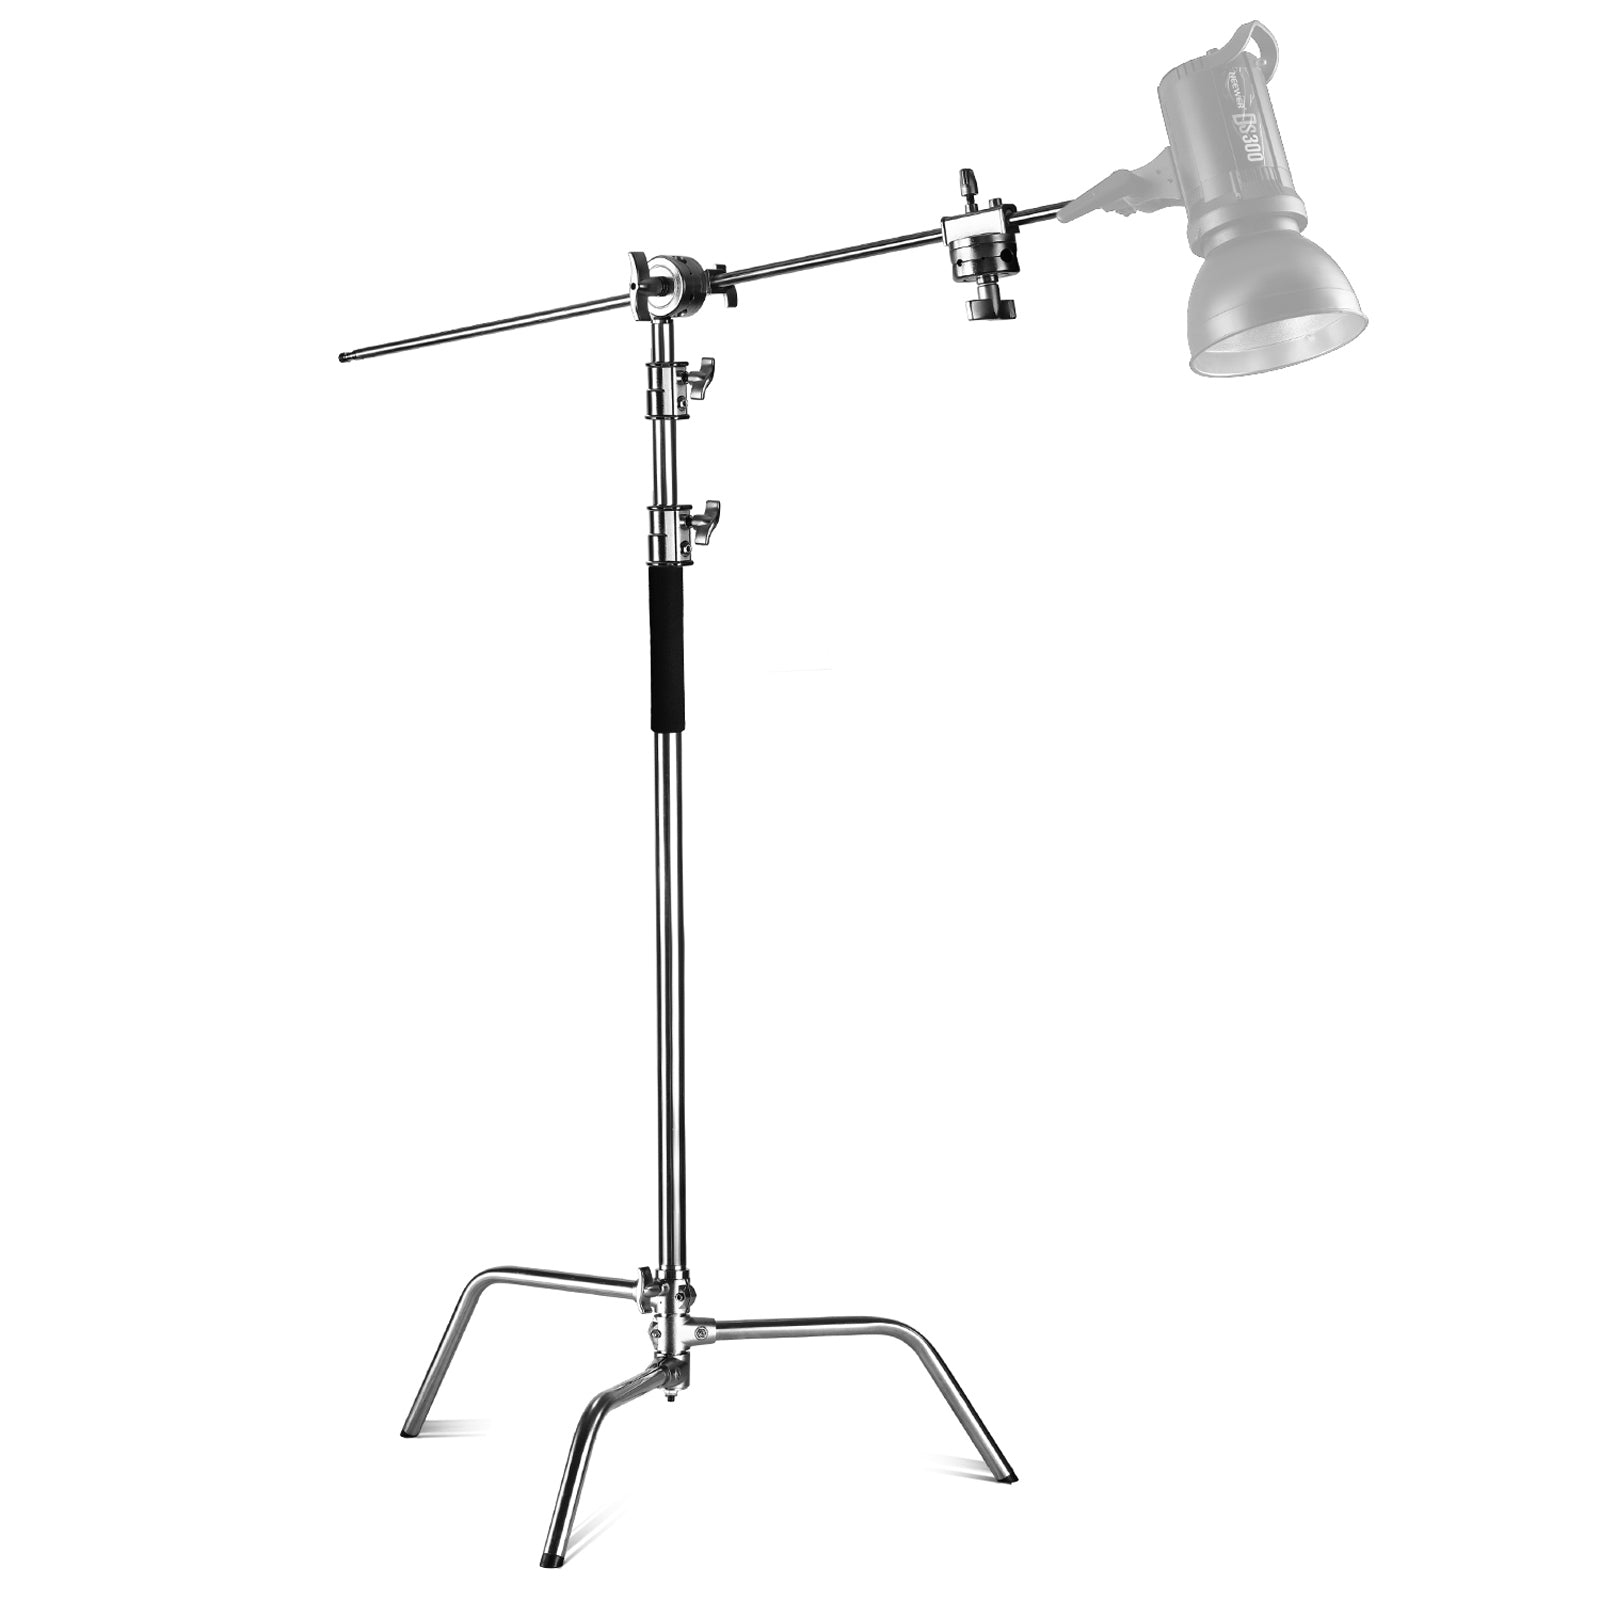 Neewer 10 Feet/3 Meters C-Stand Light Stand with 4 Feet/1.2 Meters  Extension Boom Arm, 2 Pieces Grip Head and Carry Bag for Photography Studio  Video Reflector, Umbrella, Monolight, etc (Basic Version) 